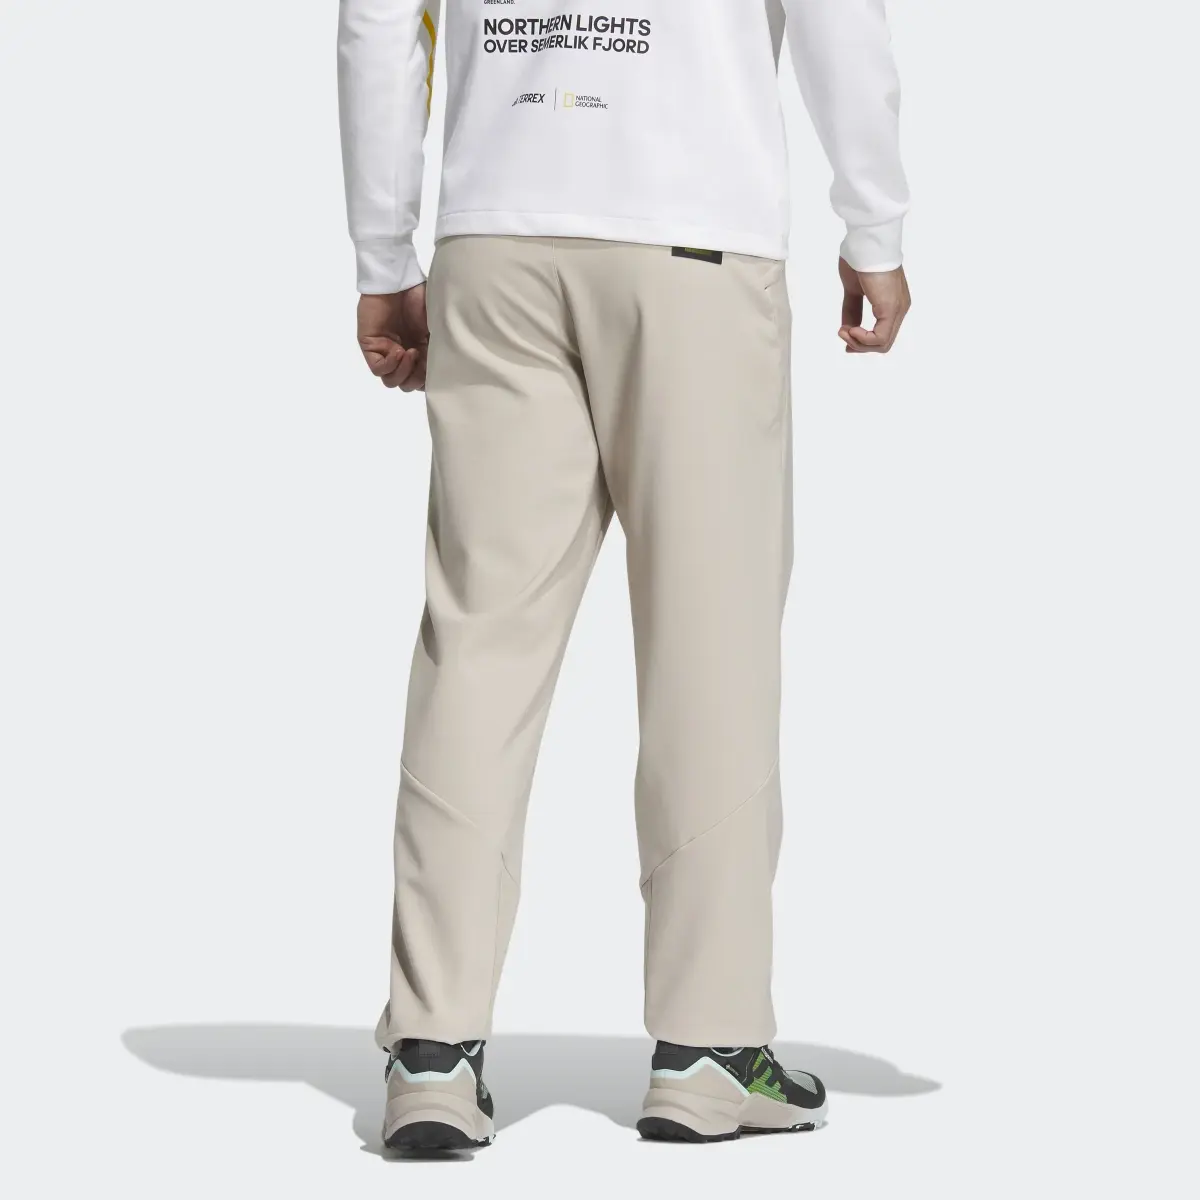 Adidas National Geographic Soft Shell Trousers. 2